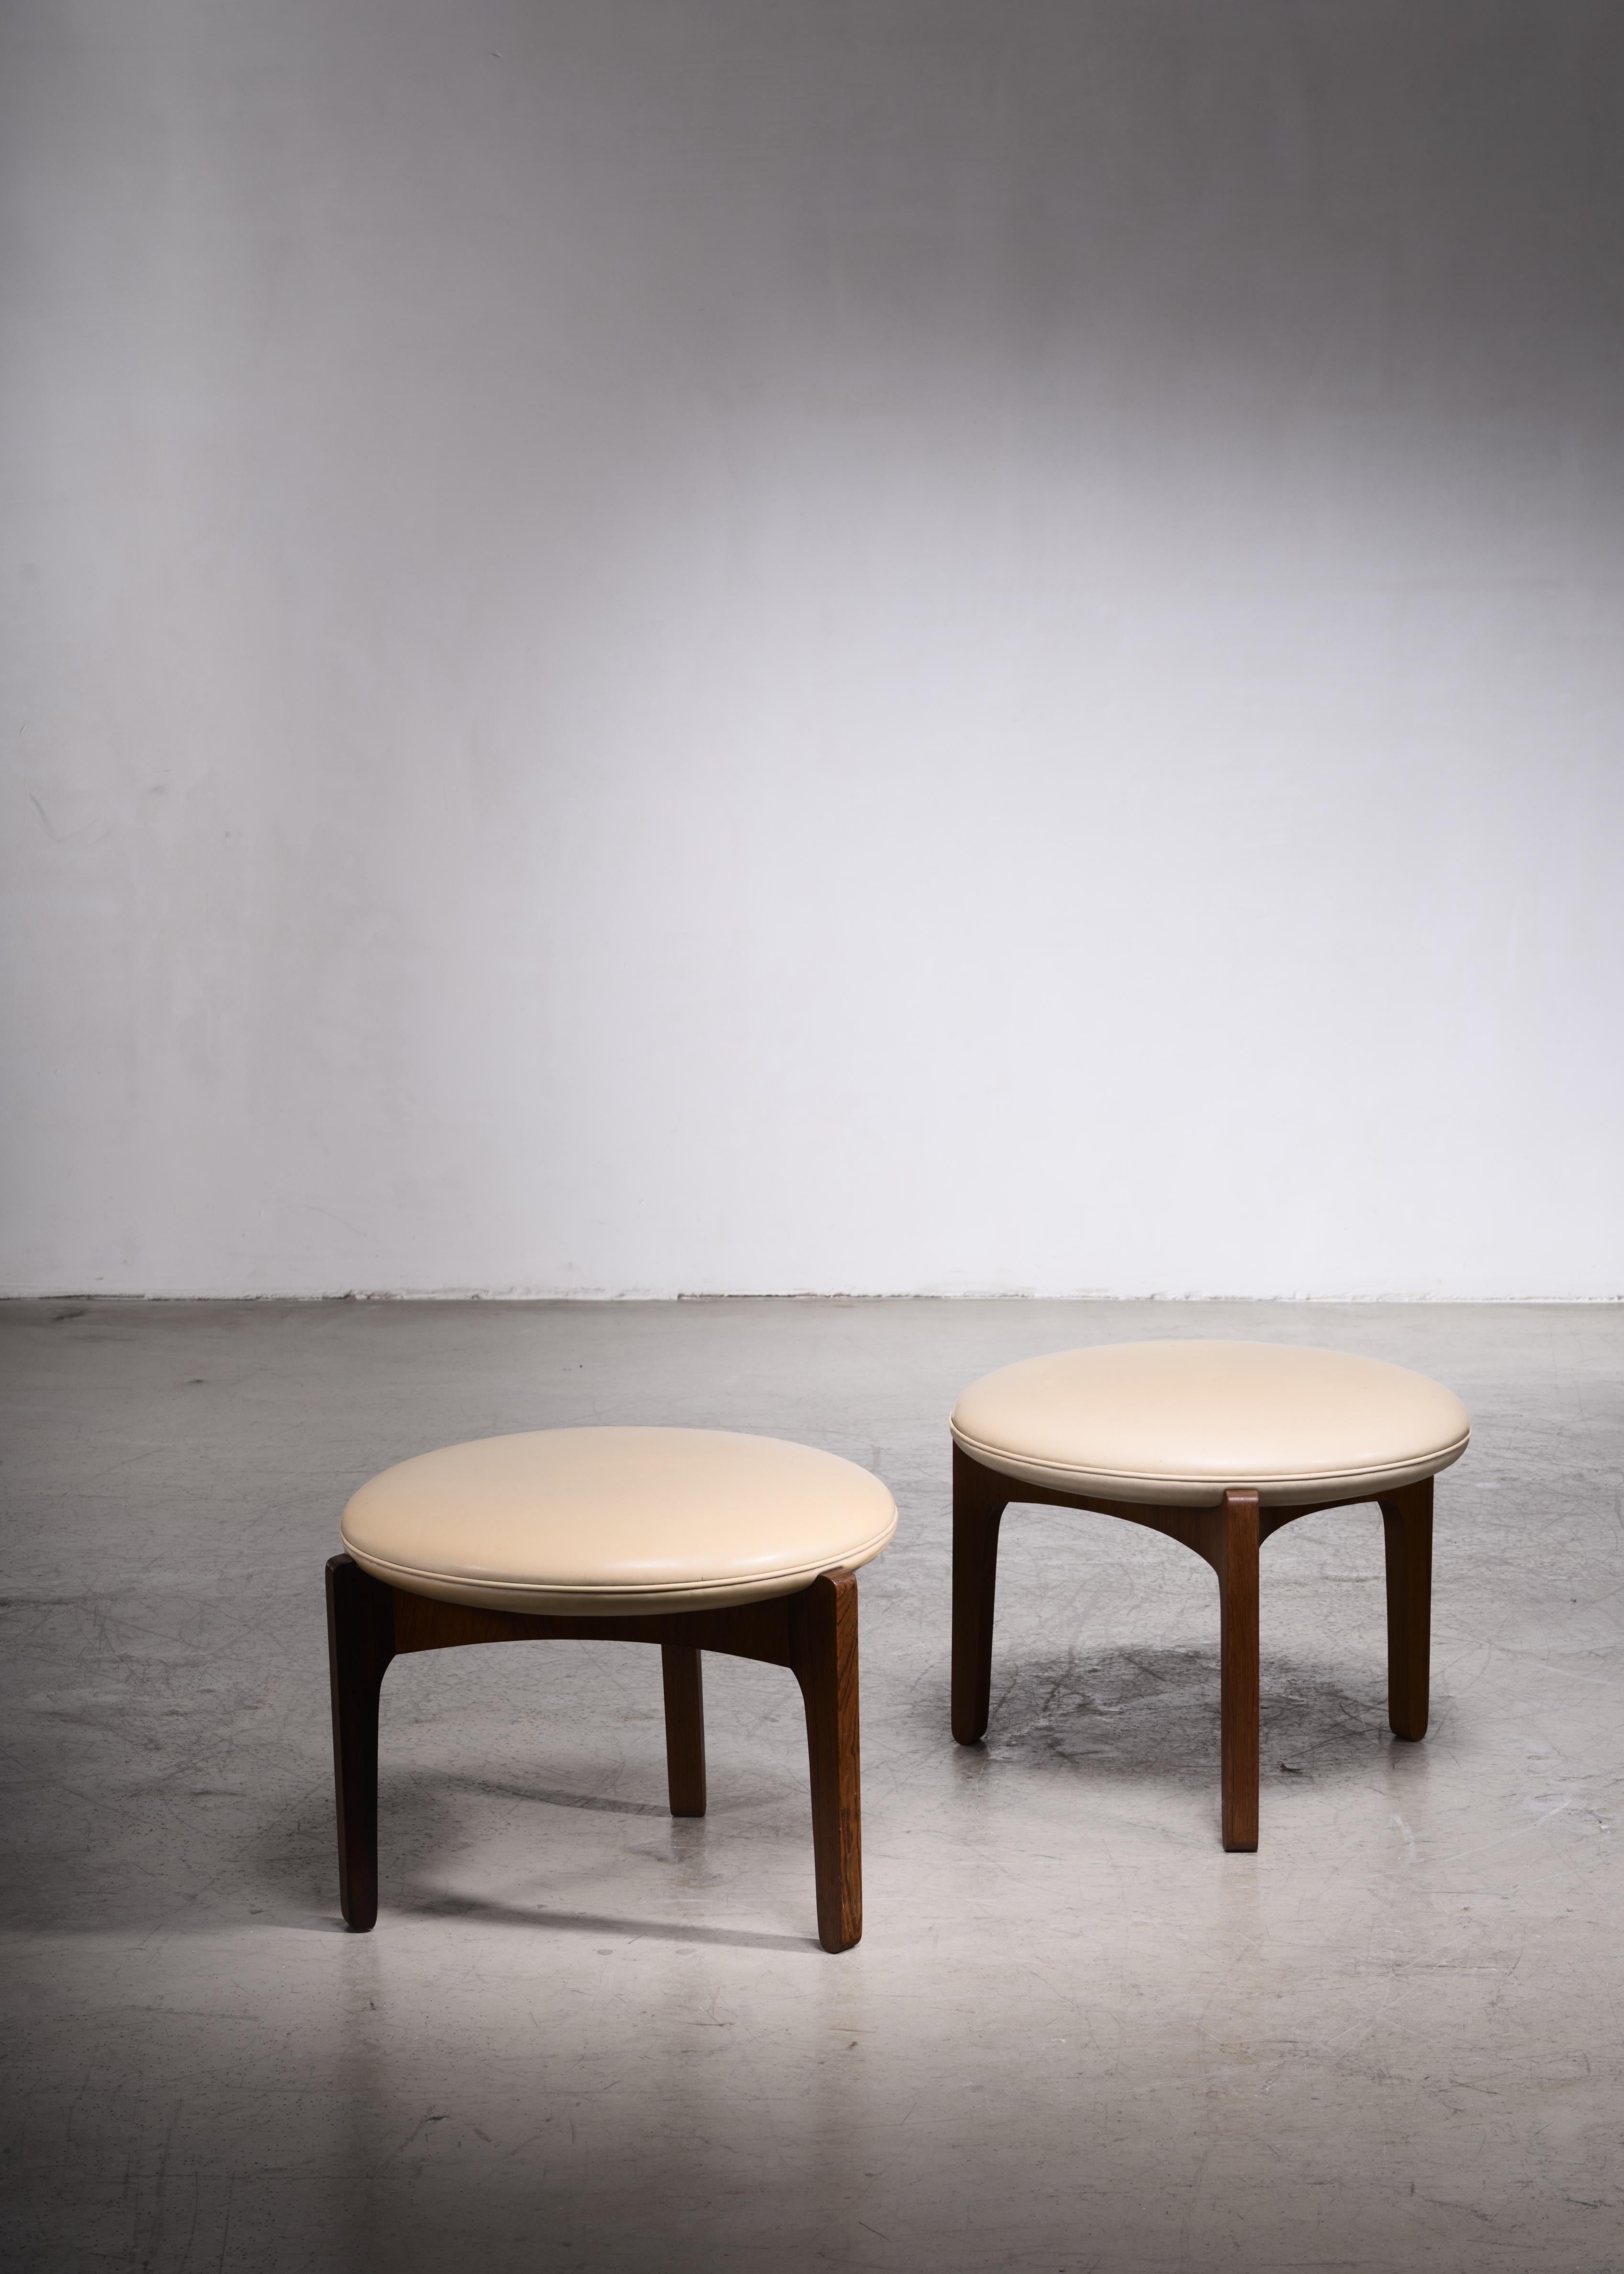 A pair of Danish 1960s tripod stools made of a rosewood frame with a leather cream colored cushion. Designed by Sven Ellekaer for Chr. Linneberg Møbelfabrik in 1962.

The stools have some minor wear, but are in an overall good condition. There are